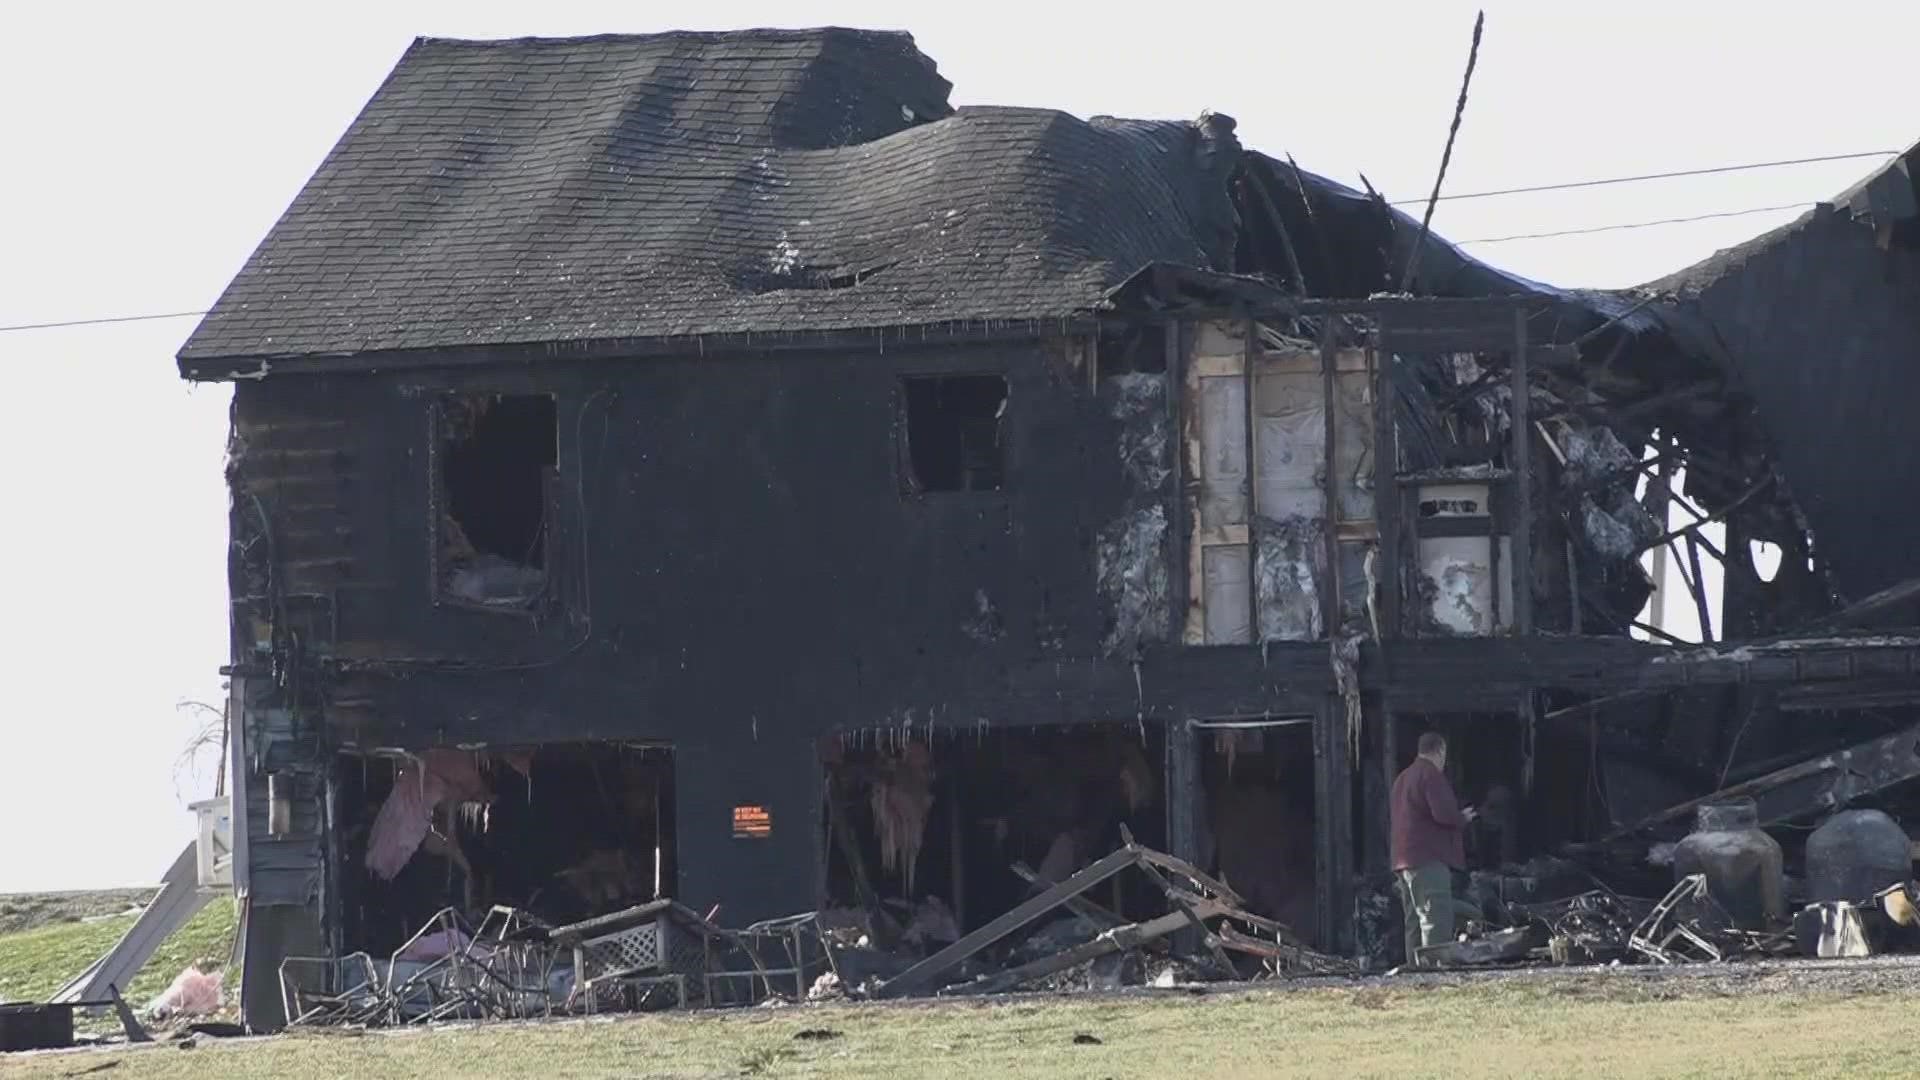 No one was home during the house fire and gas tank explosion Tuesday night in Hermon. The Hermon Fire Department says fires are common this time of year.